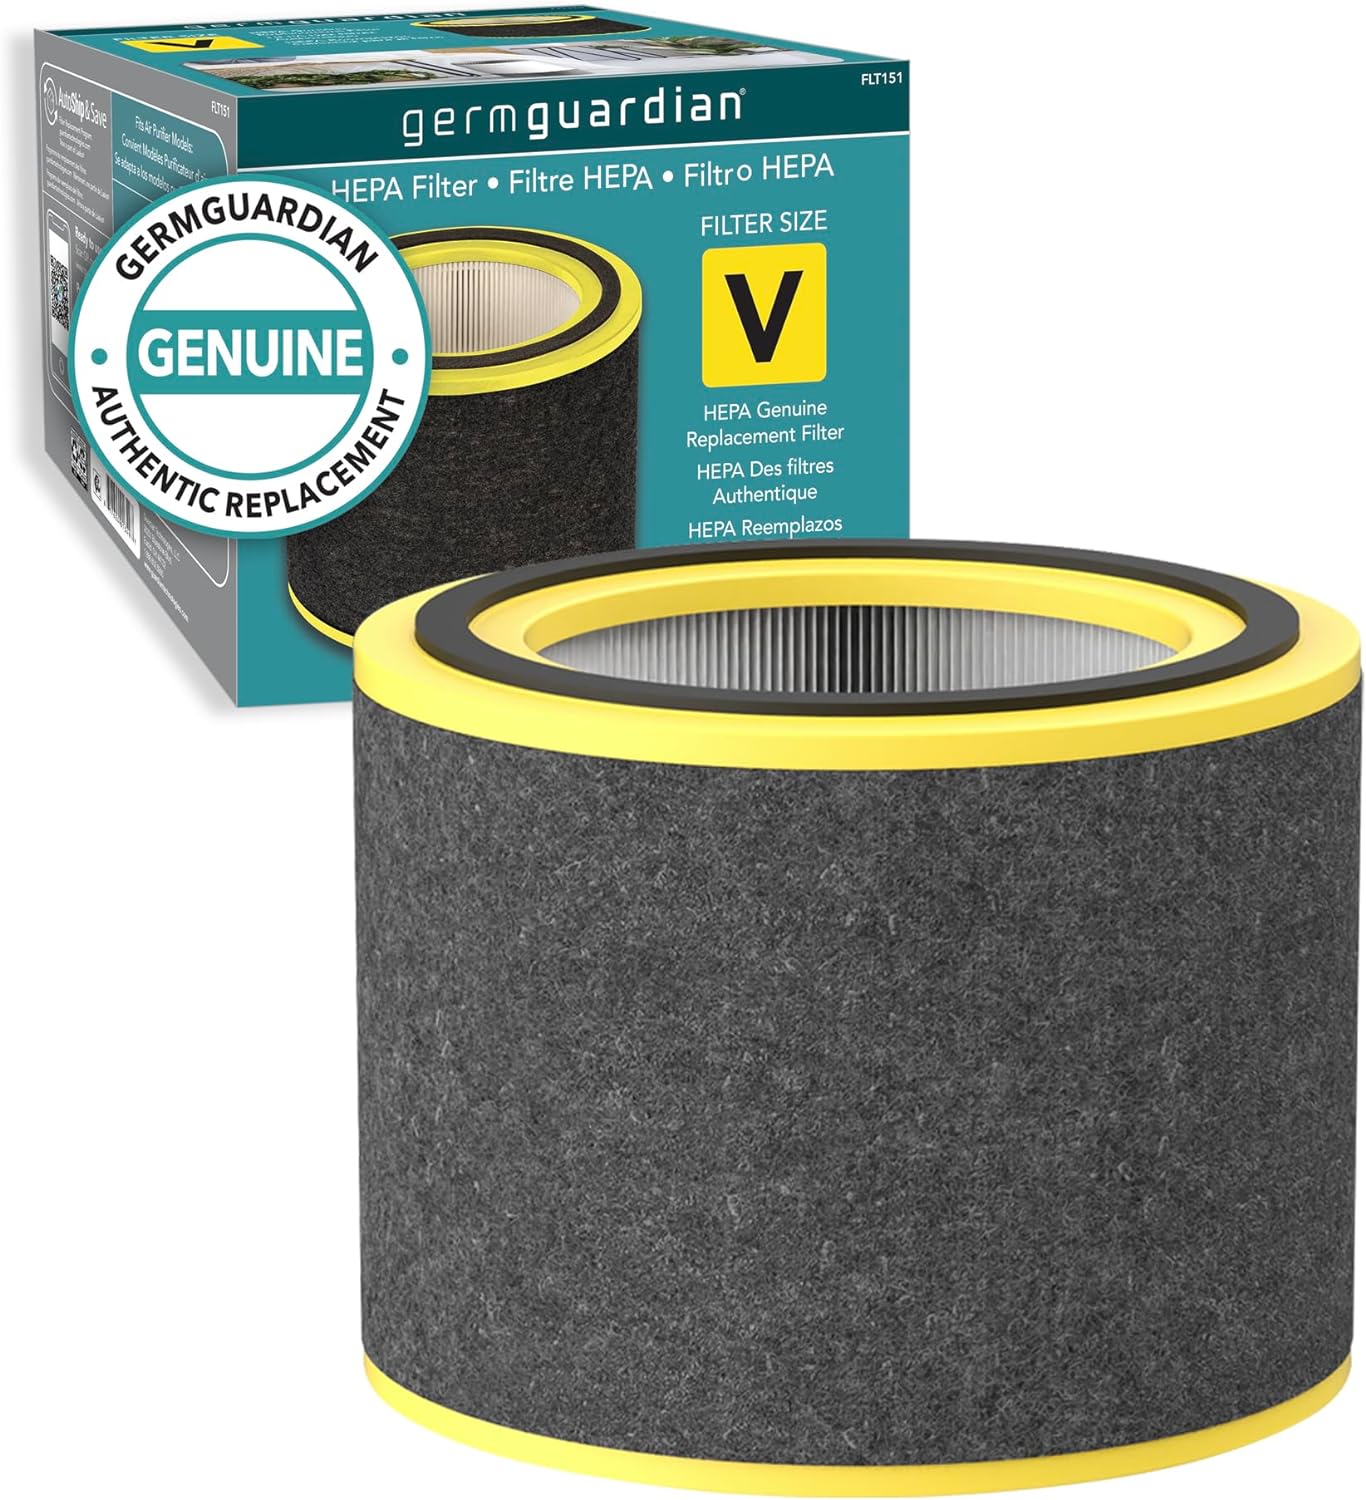 GermGuardian Filter V HEPA Pure Genuine Air Purifier Replacement Filter, Removes 99.97% of Pollutants for AirSafe Series and AC151, Black/Yellow, FLT151